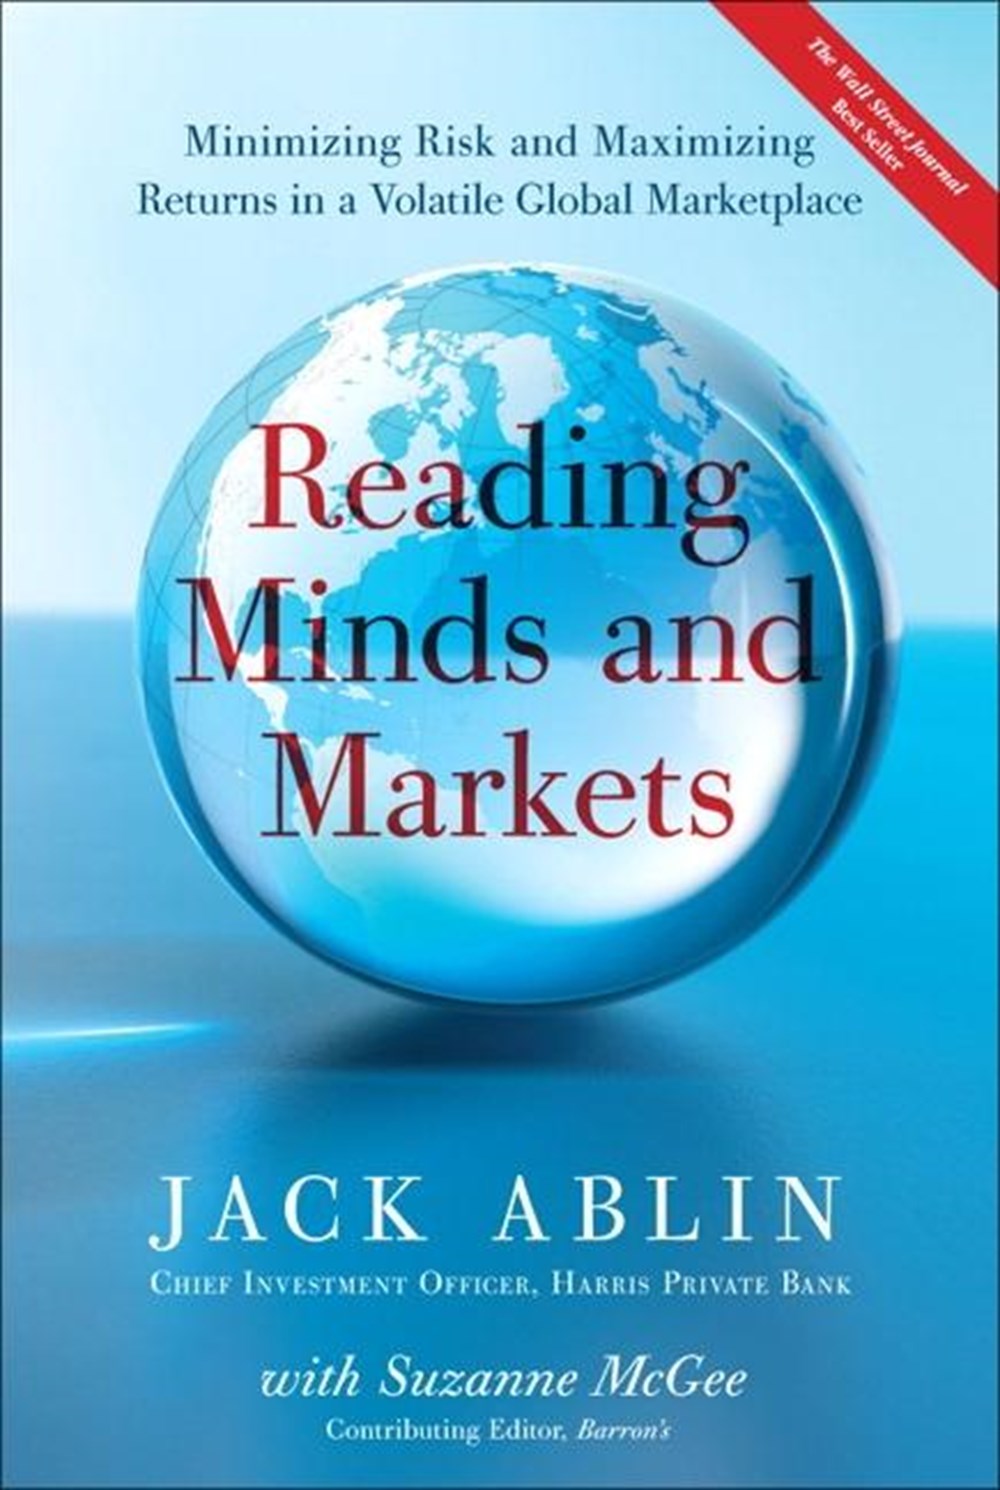 Reading Minds and Markets Minimizing Risk and Maximizing Returns in a Volatile Global Marketplace